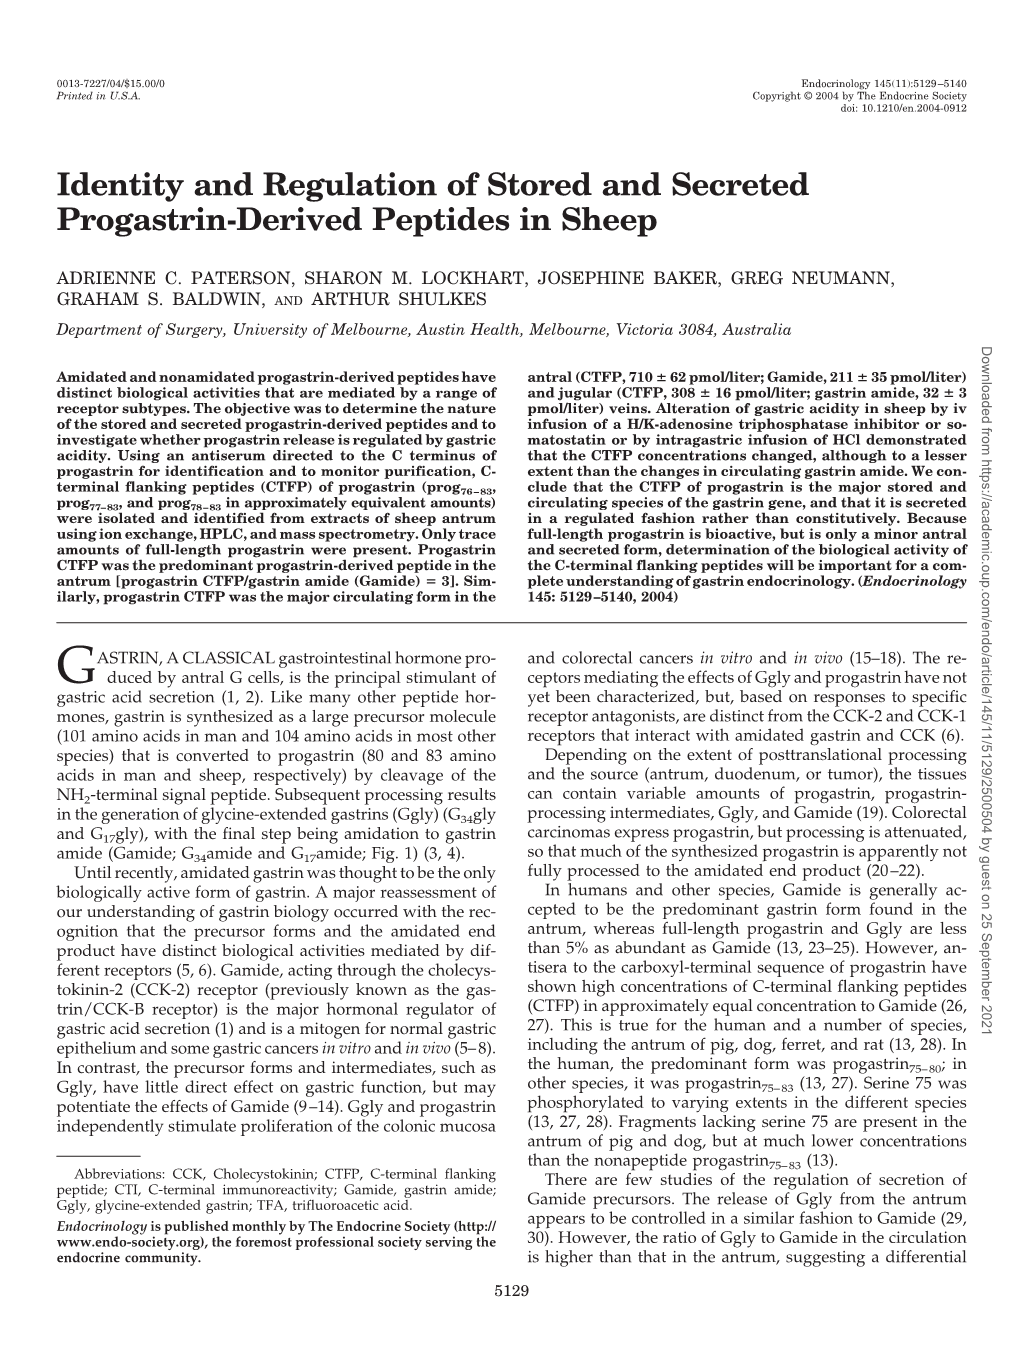 Identity and Regulation of Stored and Secreted Progastrin-Derived Peptides in Sheep